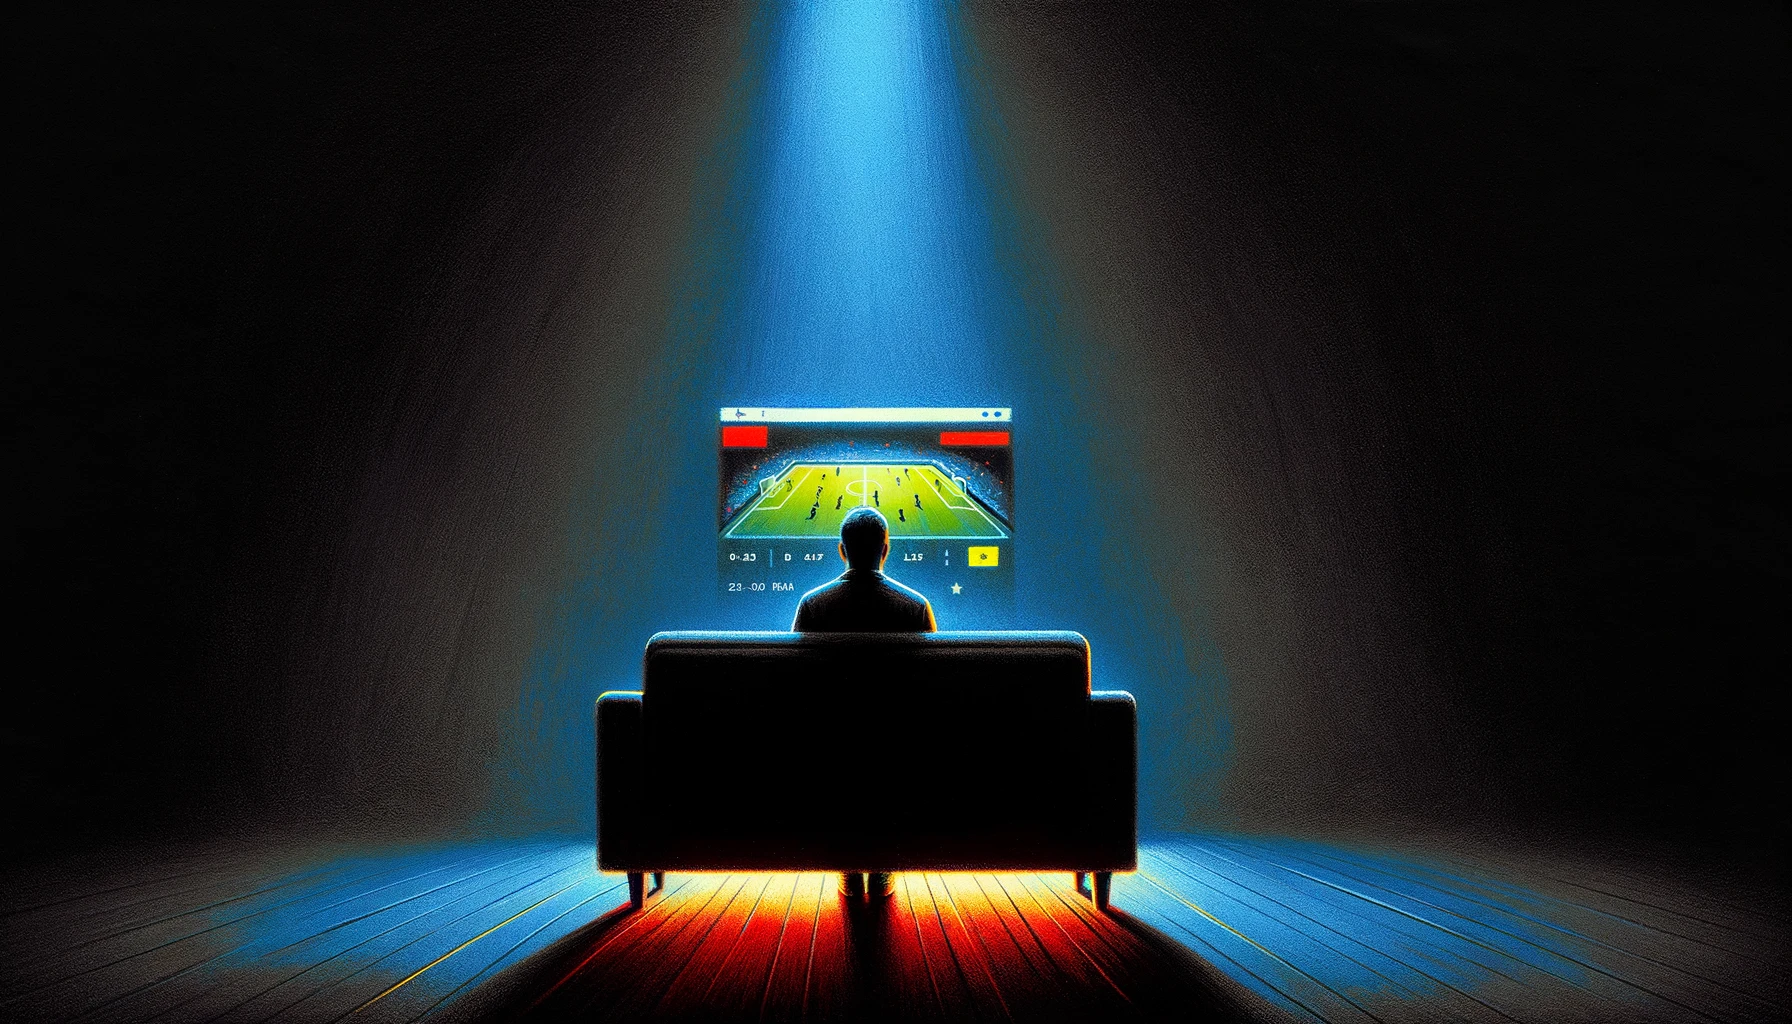 This image portrays a lone figure illuminated by the light of a smartphone screen, surrounded by darkness. It captures the solitary nature of sports betting through apps, contrasting the vibrant world of sports with the individual's isolation.